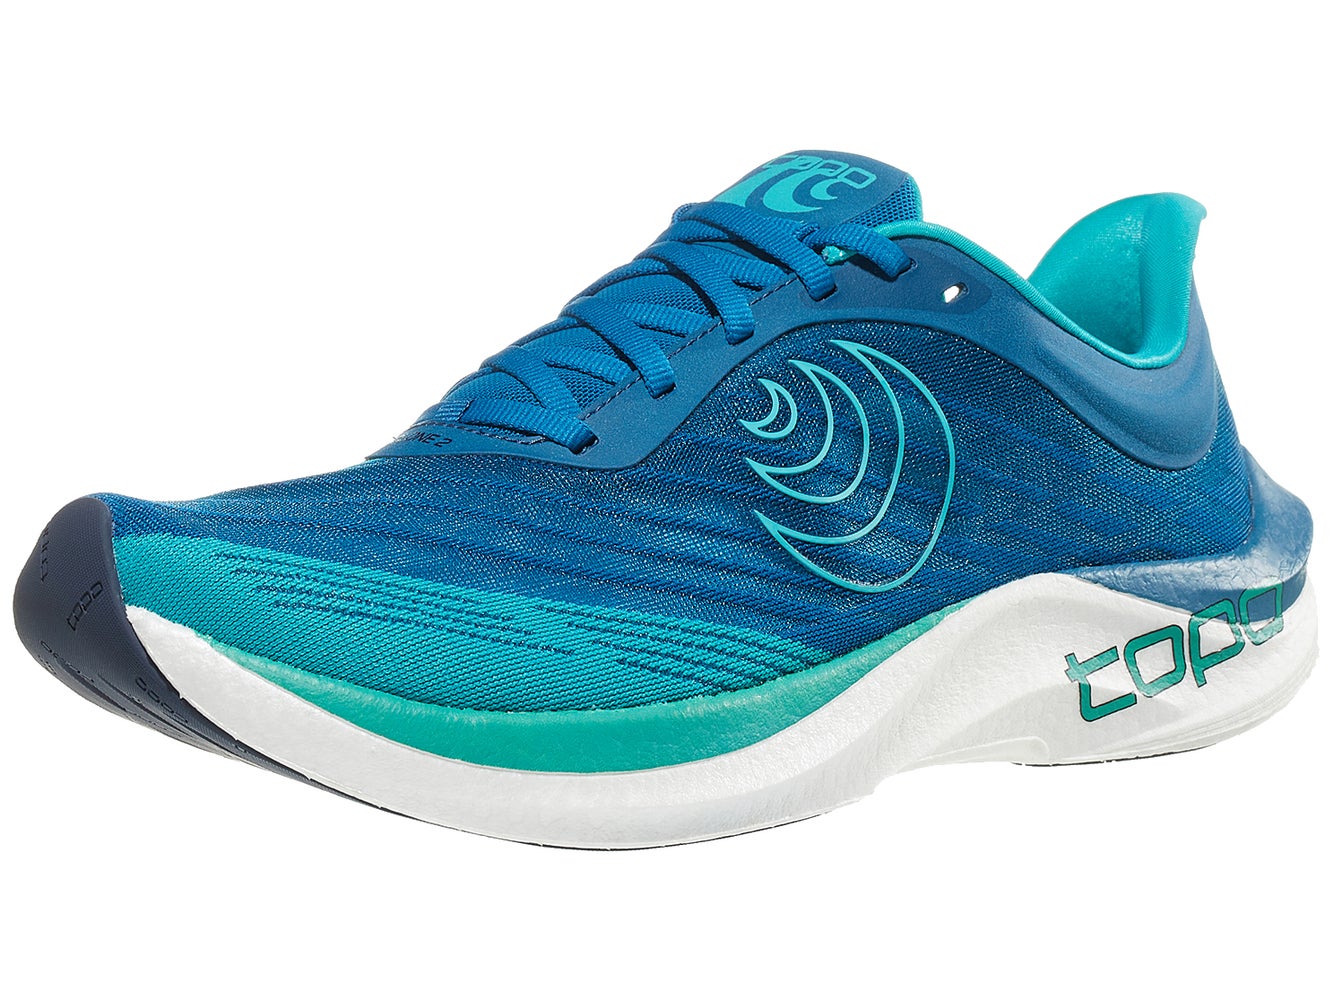 Topo Athletic Cyclone 2 Shoe Review | Running Warehouse